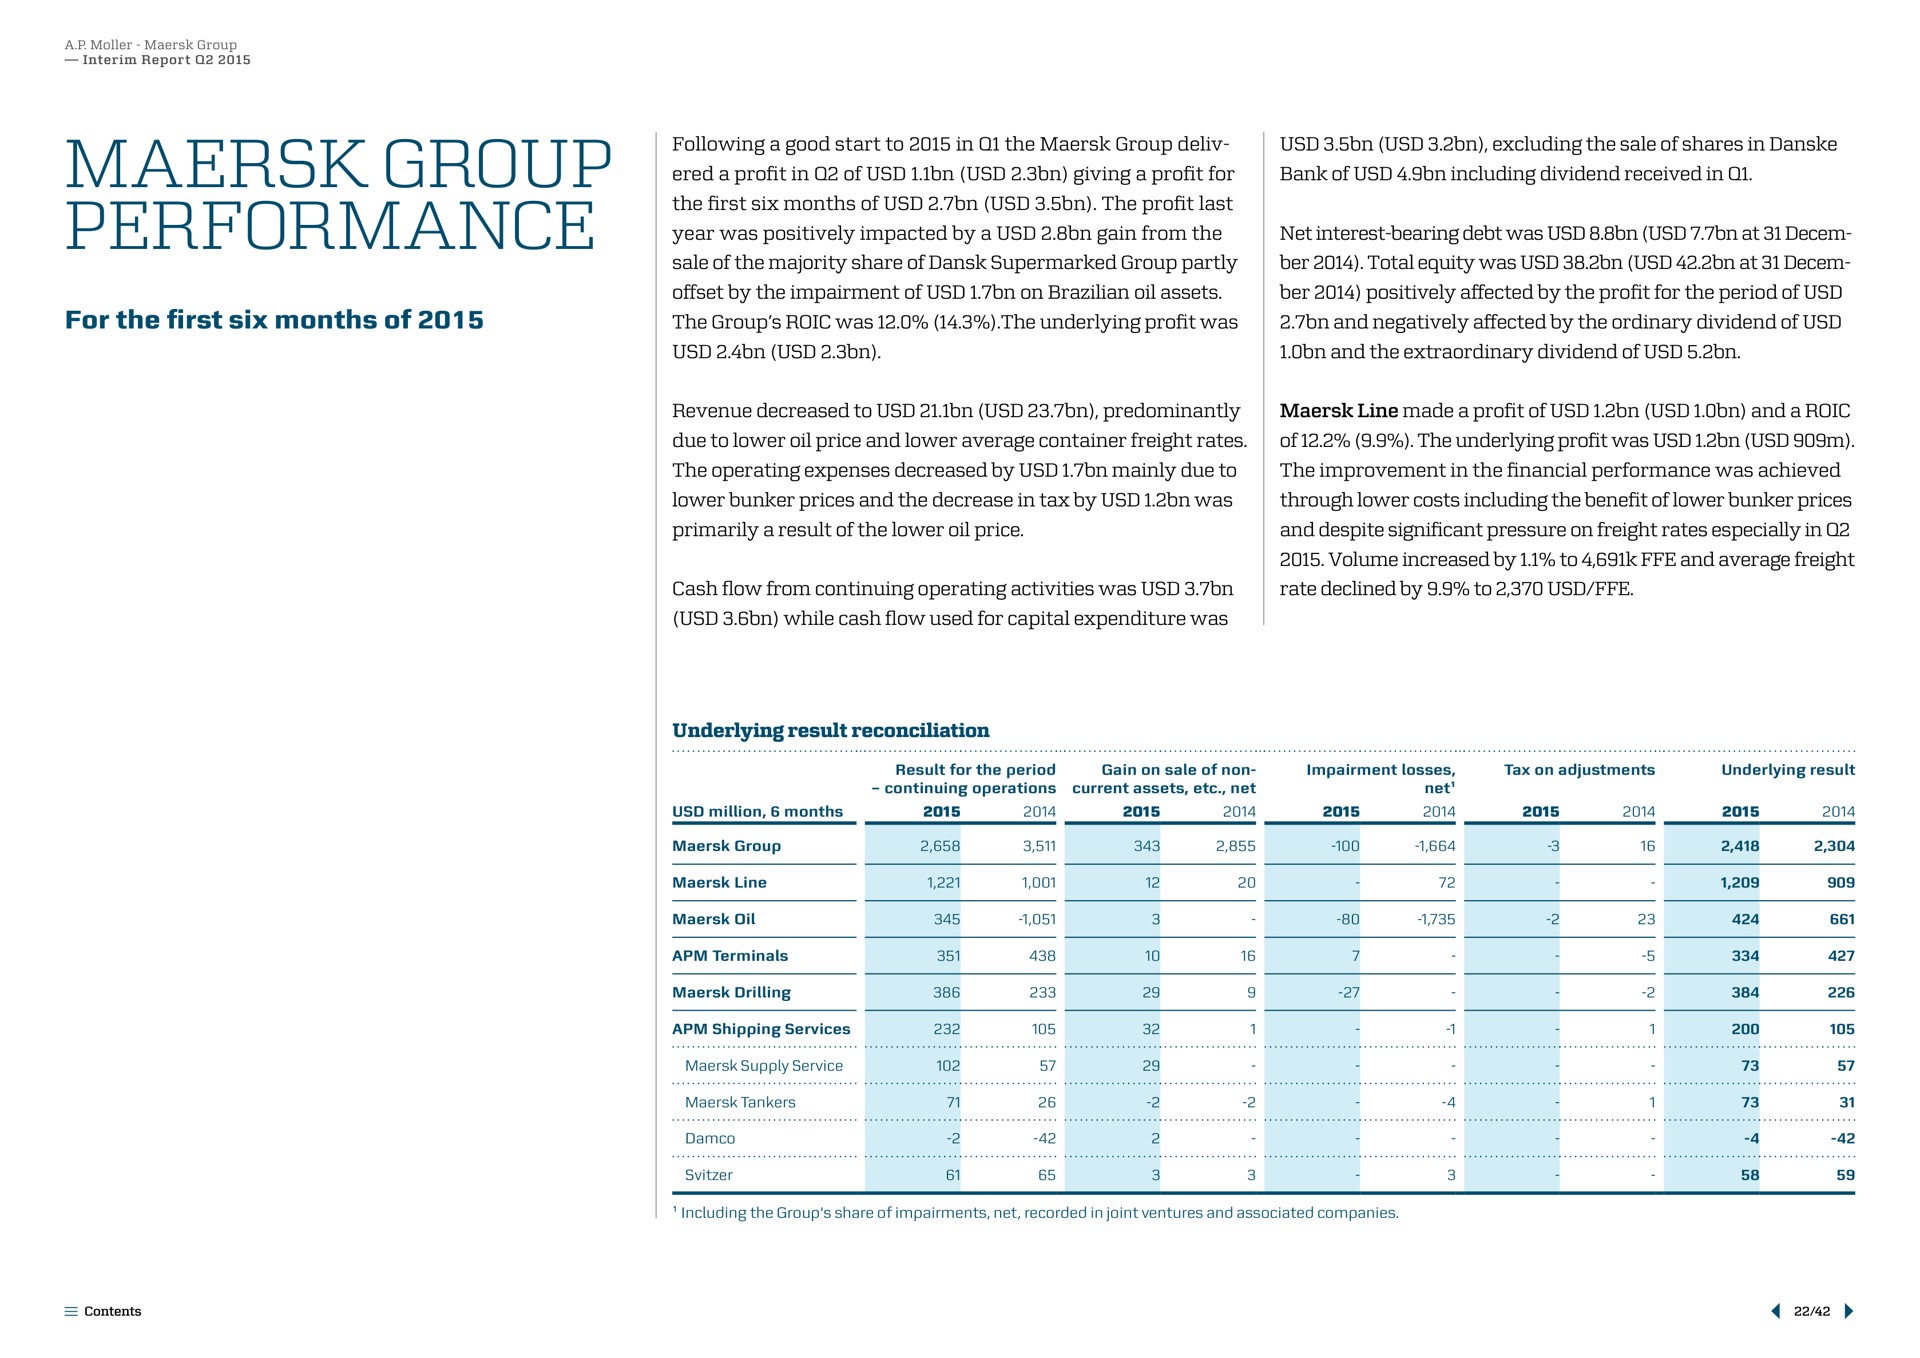 group performance for the first six months of a profit in giving a profit bank including dividend received in year was positively impacted by a gain from sale majority share partly ber total equity was at was underlying profit was and negatively affected by ordinary dividend operating expenses decreased by mainly due to improvement in financial was achieved volume increased by to and average freight underlying result reconciliation | Maersk